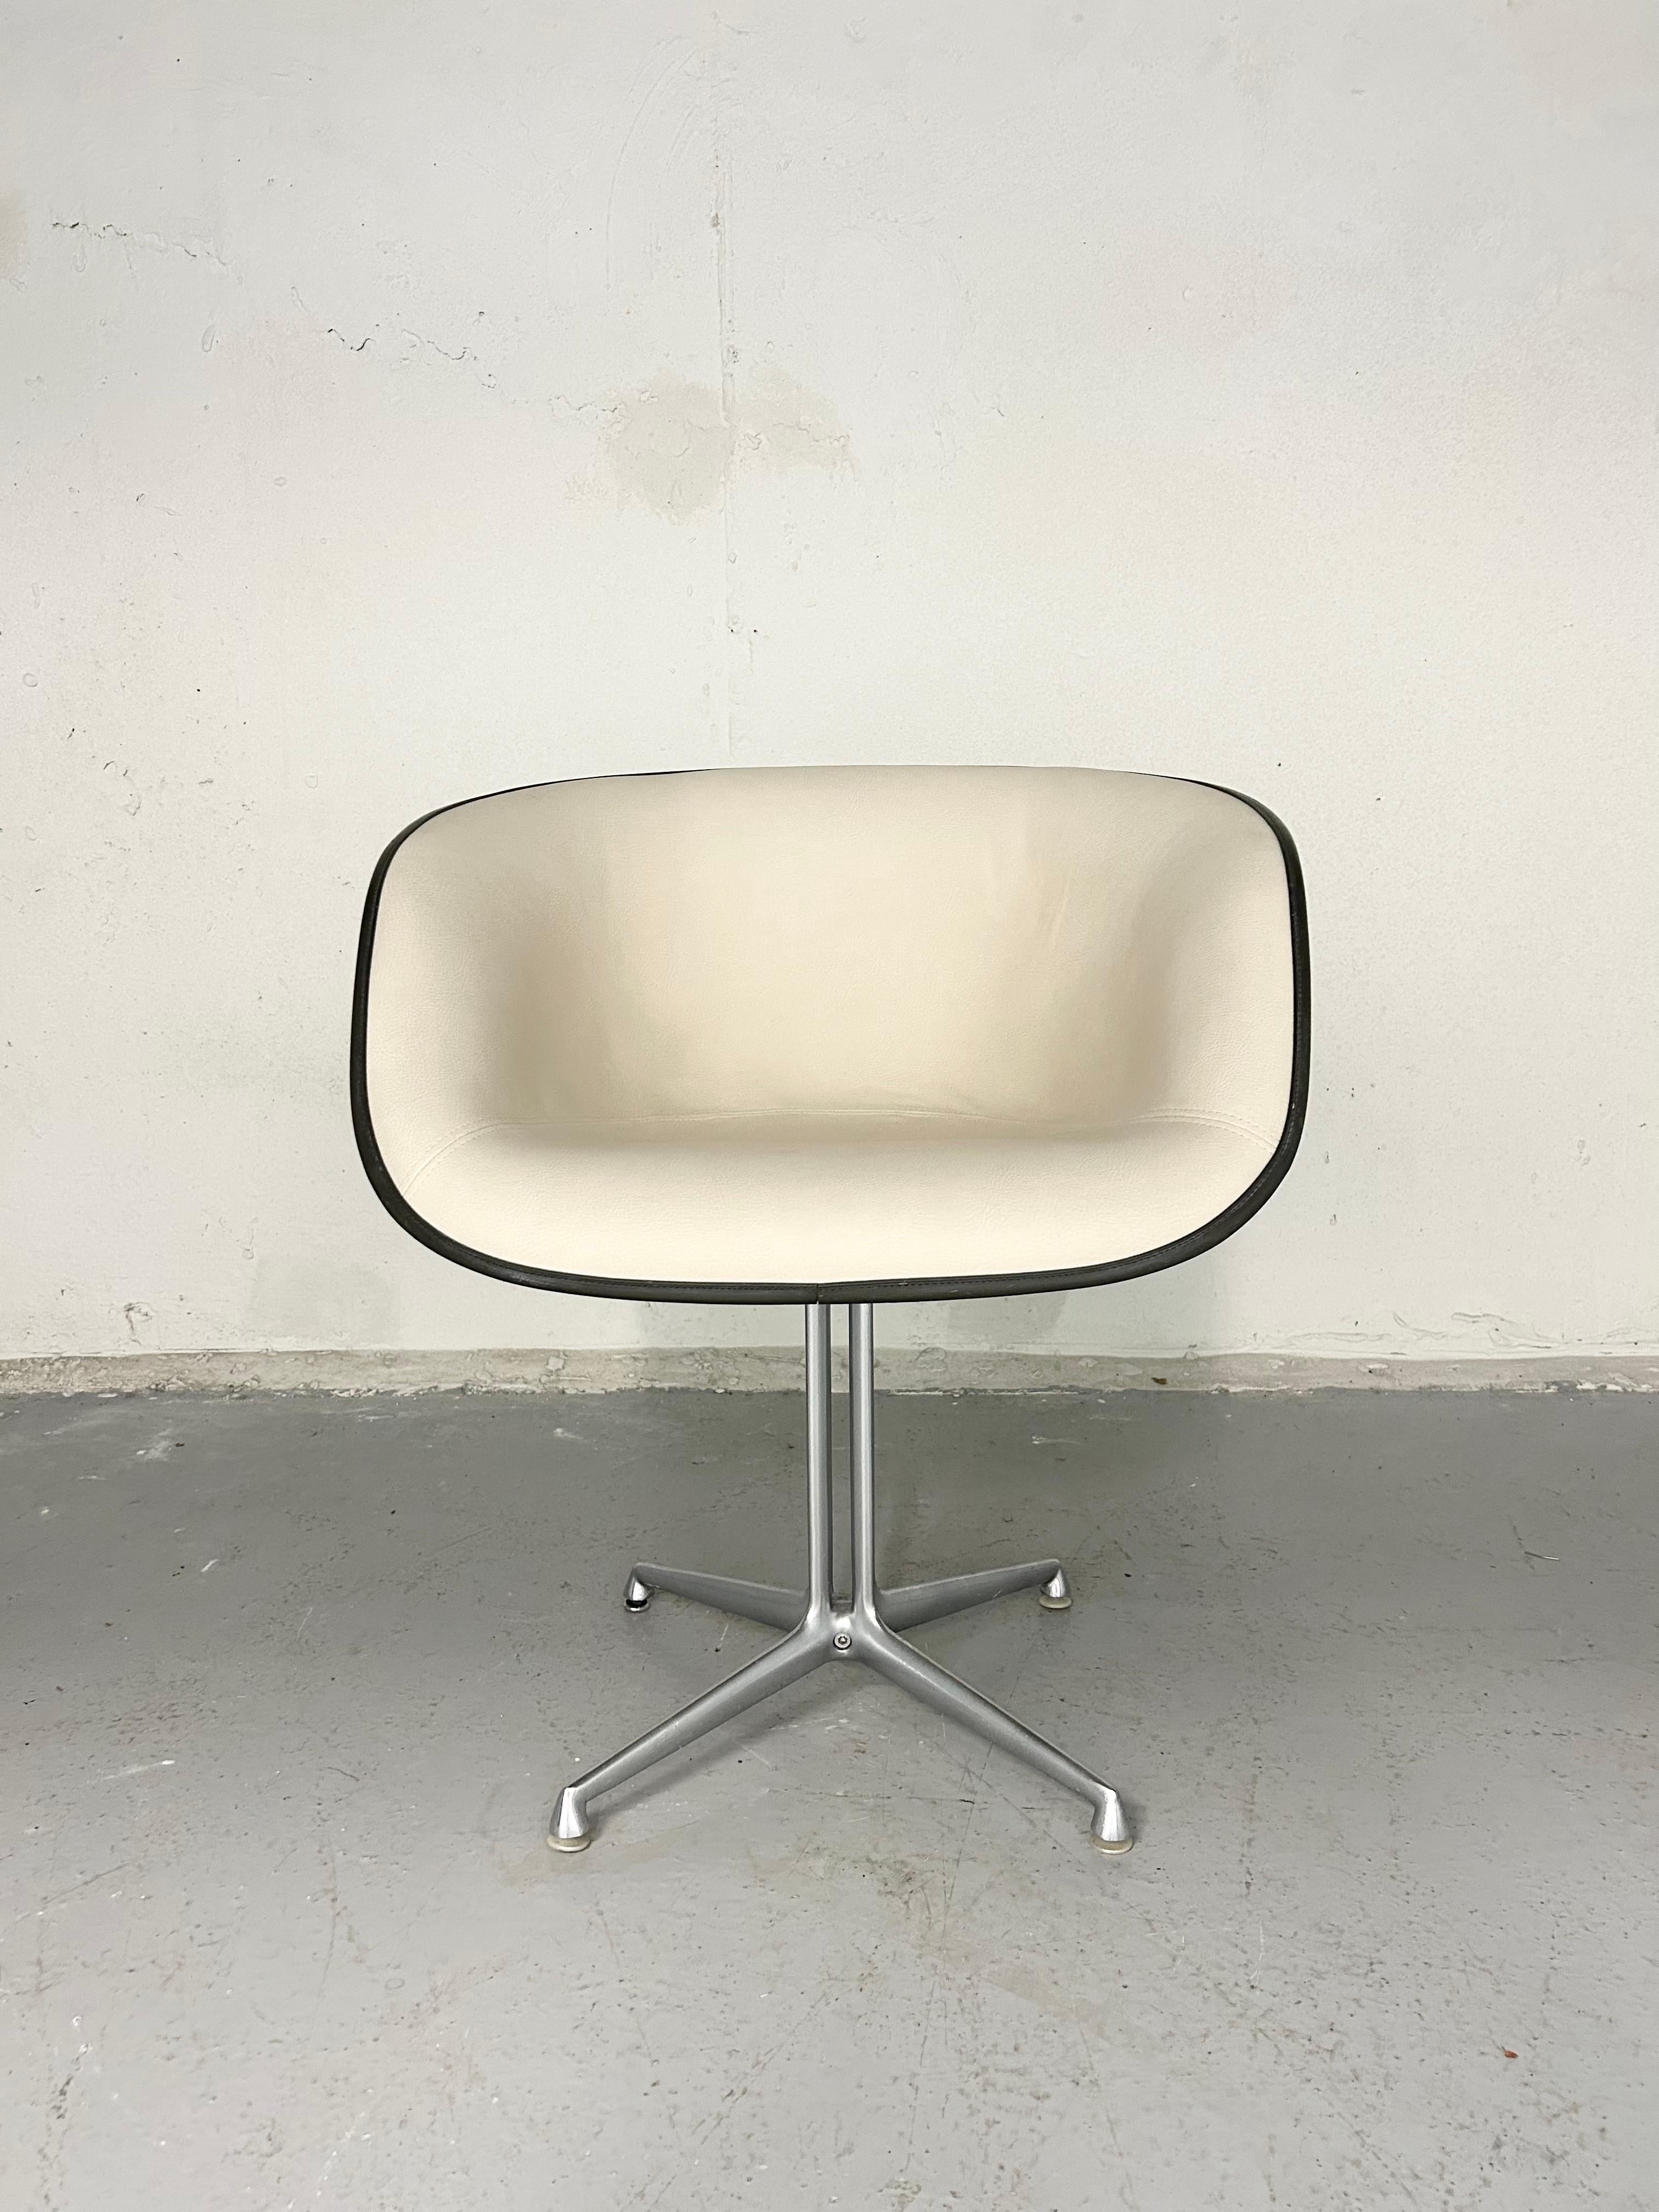 Vintage Eames La Fonda chair for Herman Miller from the 1960s. Original fiberglass shell and metal base - new faux leather upholstery with original dark binding trim. 

Measures: 29” height.
19” seat height.
25” width.
25” depth.